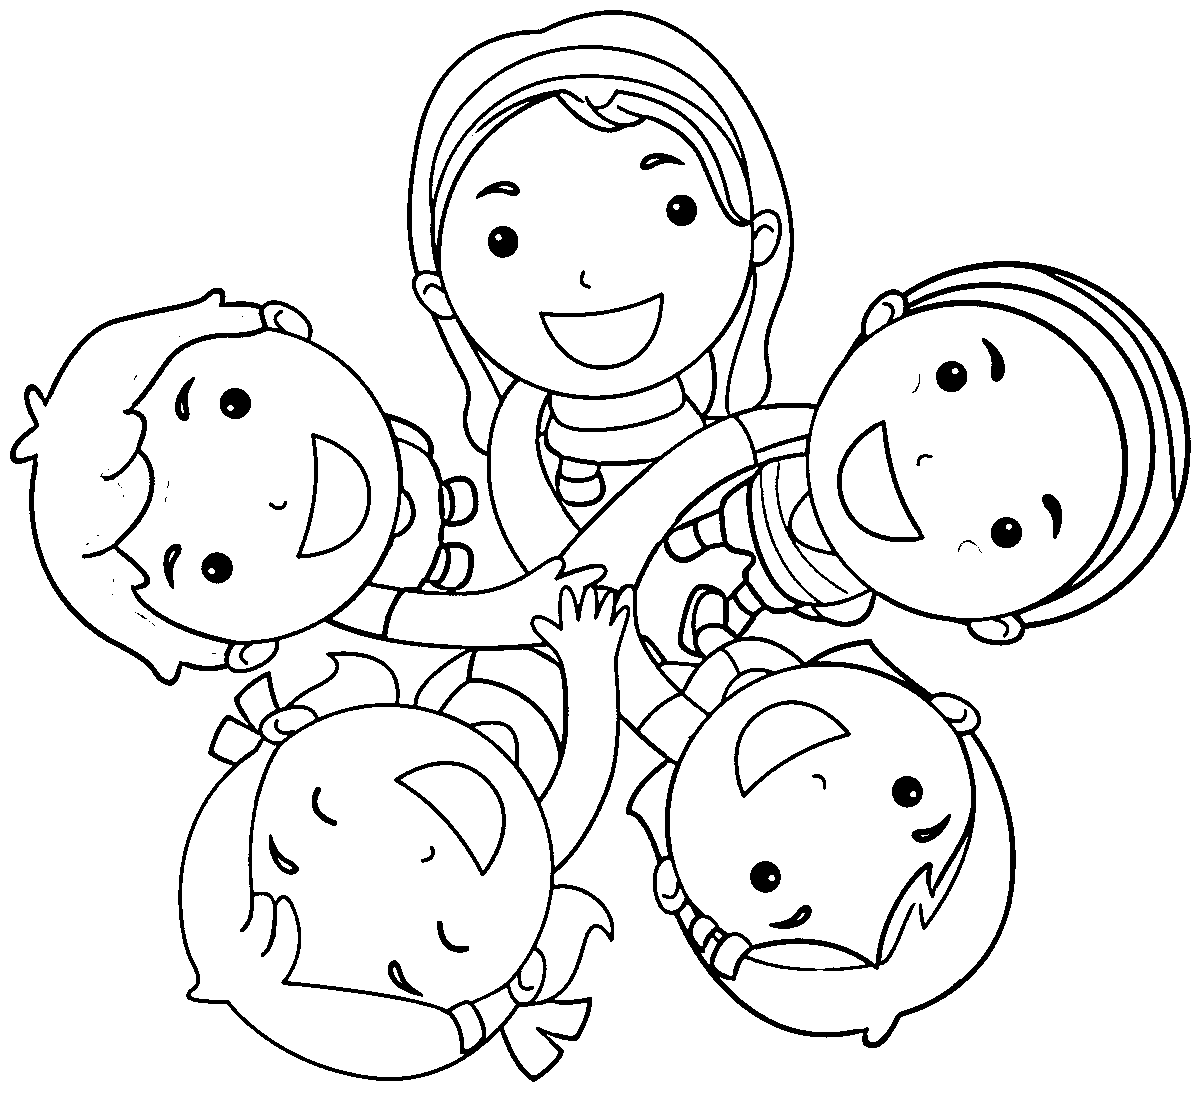 friendship-coloring-pages-to-download-and-print-for-free